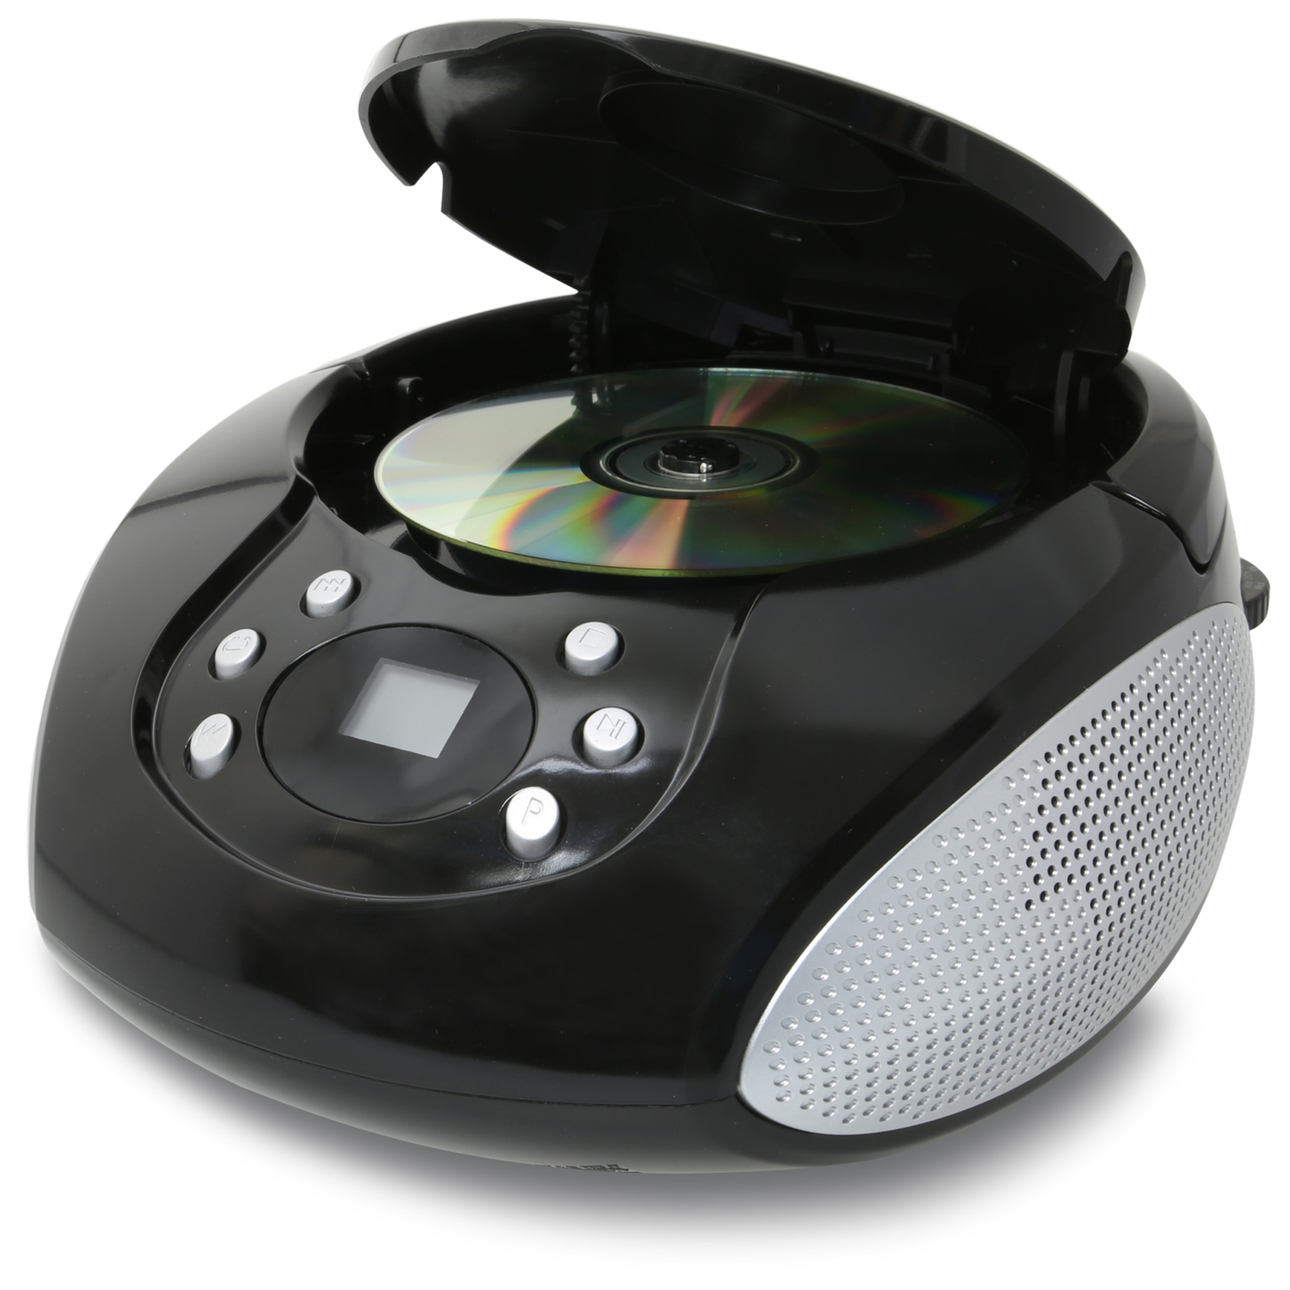 GPX CD Boombox with AM/FM Radio, BC112B - image 2 of 3